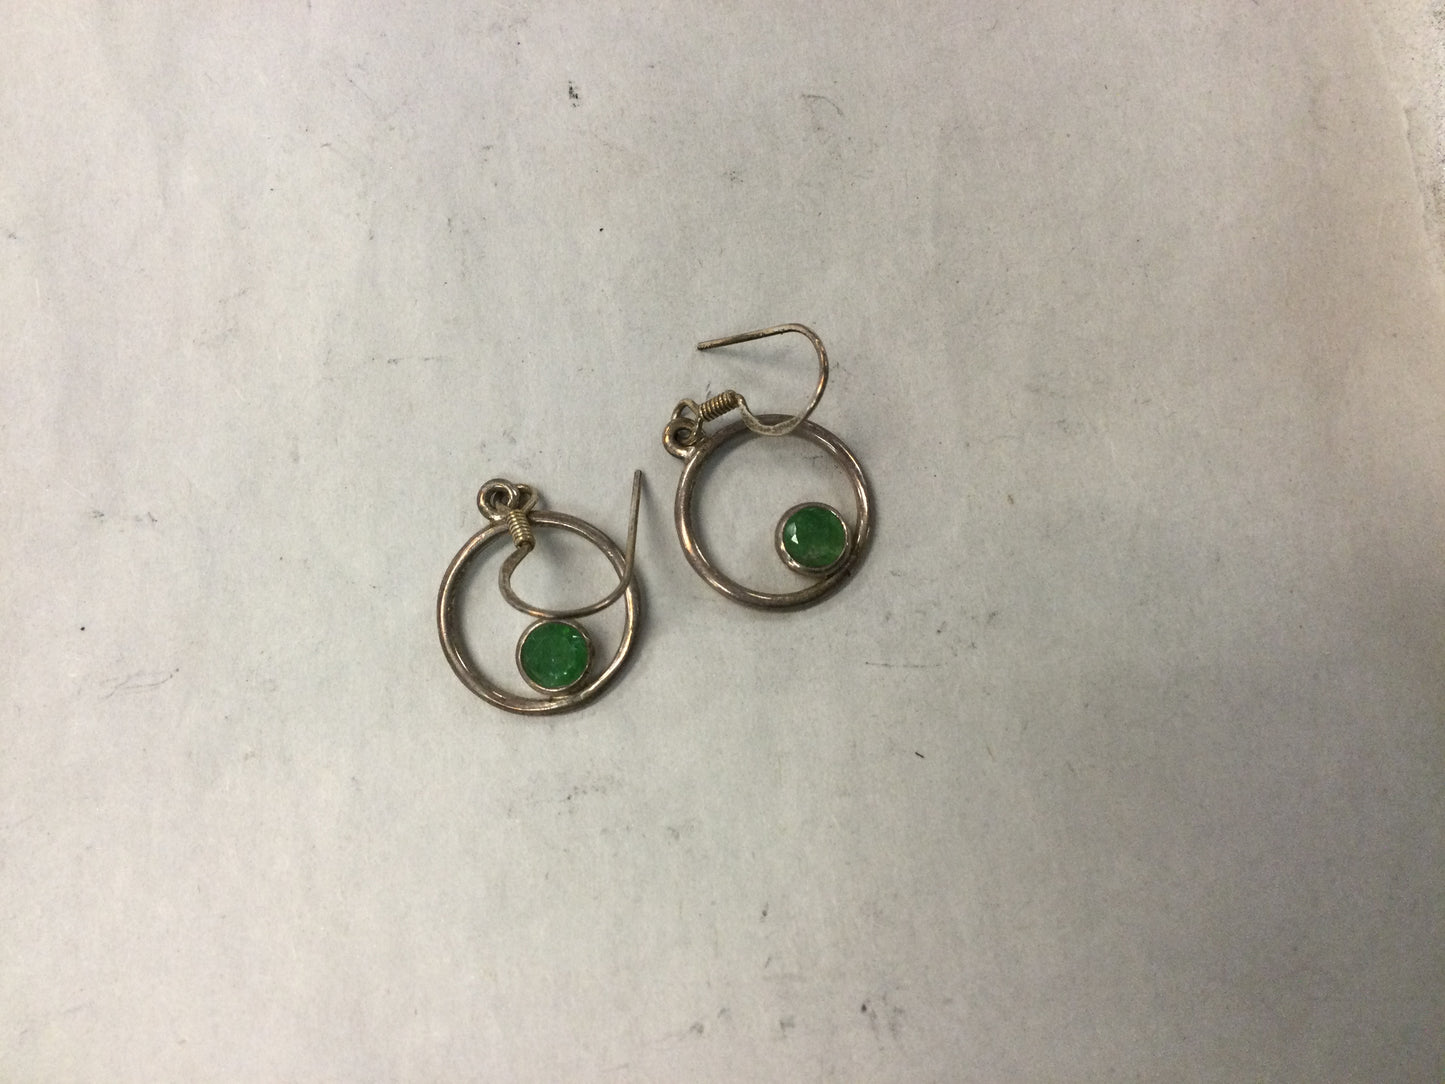 Silver Circle Drop Earrings With Green Stone Center Piece